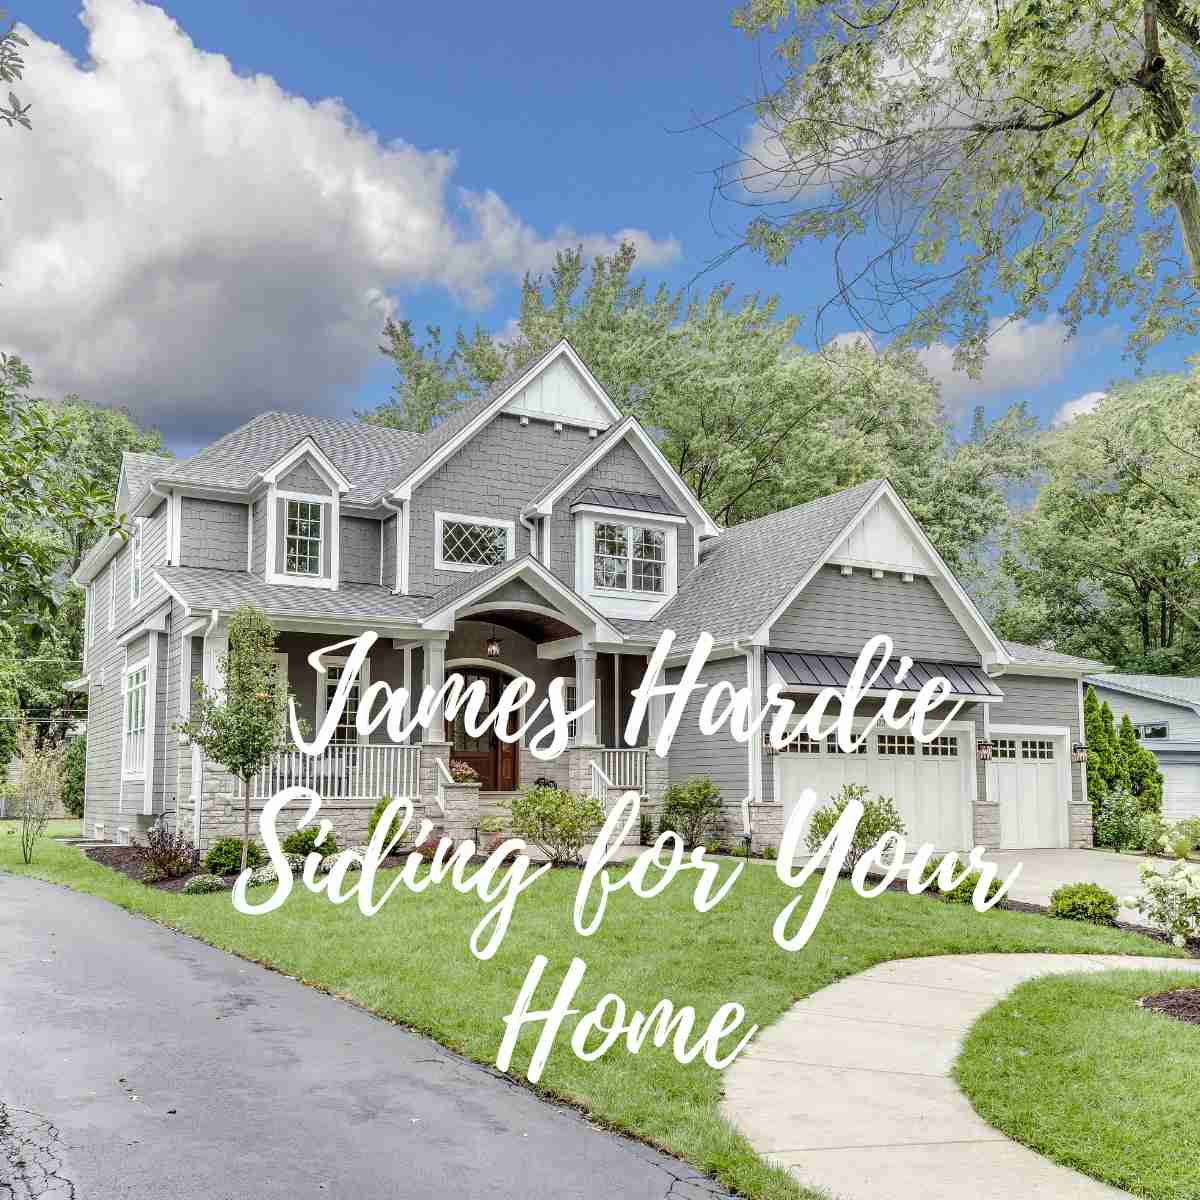 Choosing James Hardie Siding for Your Home